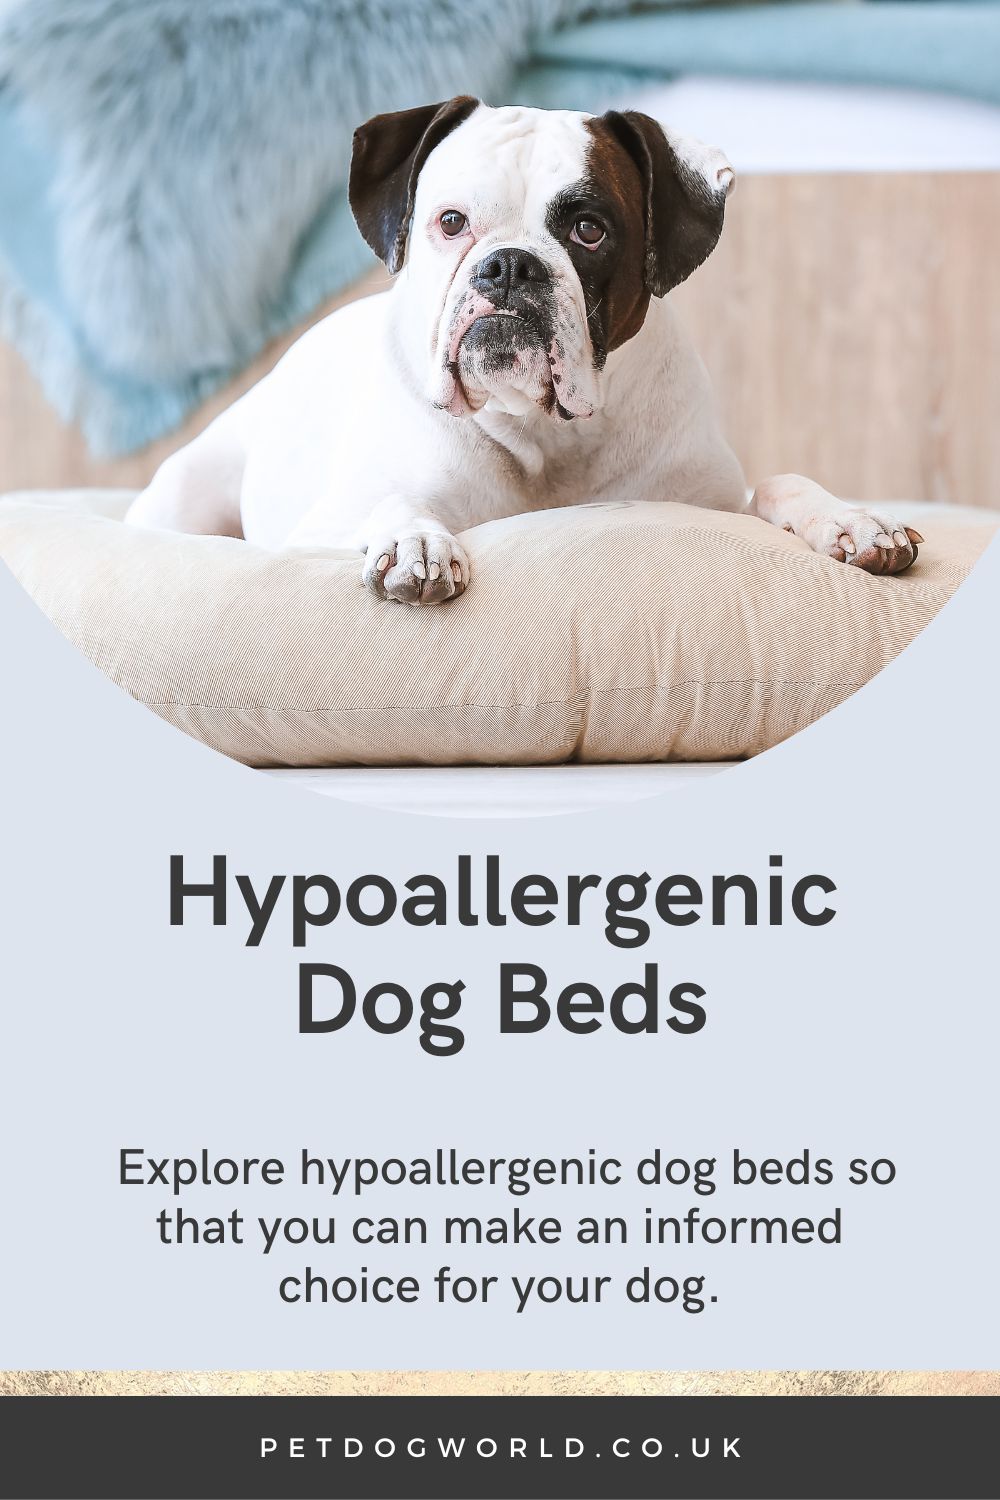 In this article, we will explore hypoallergenic dog beds so that you can make an informed choice for your dog.